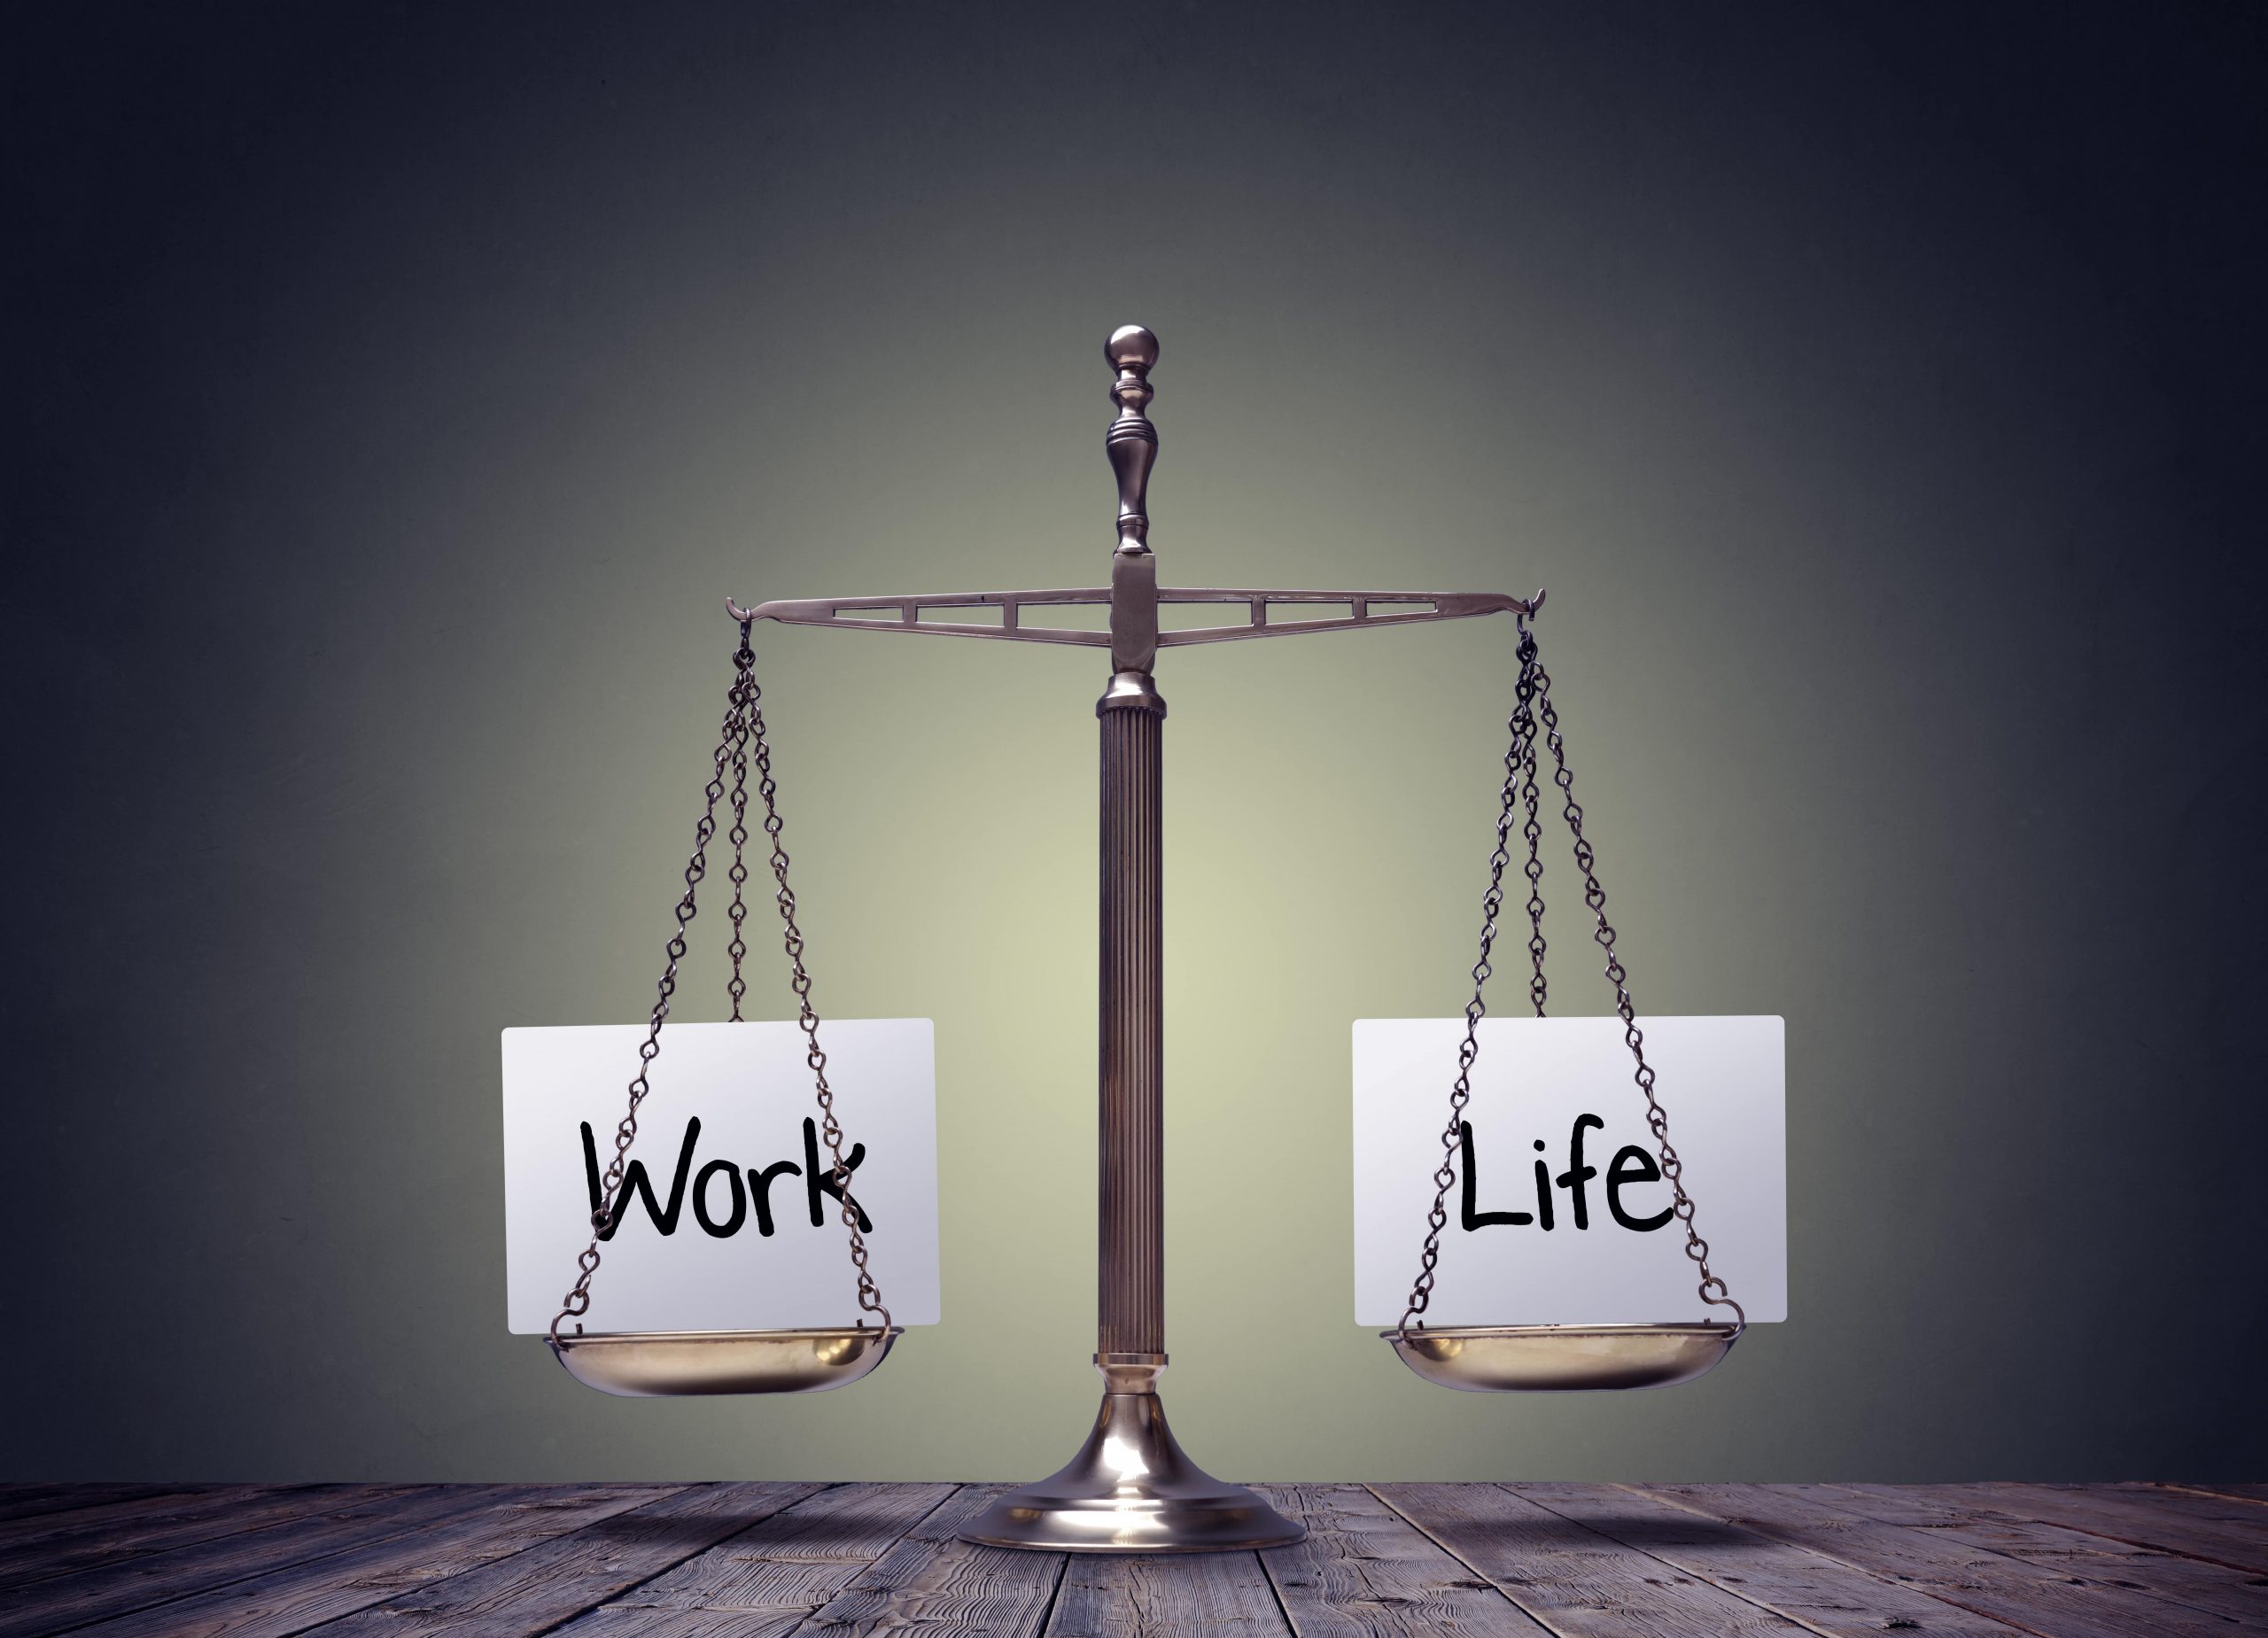 Work-life. What’s the right balance?